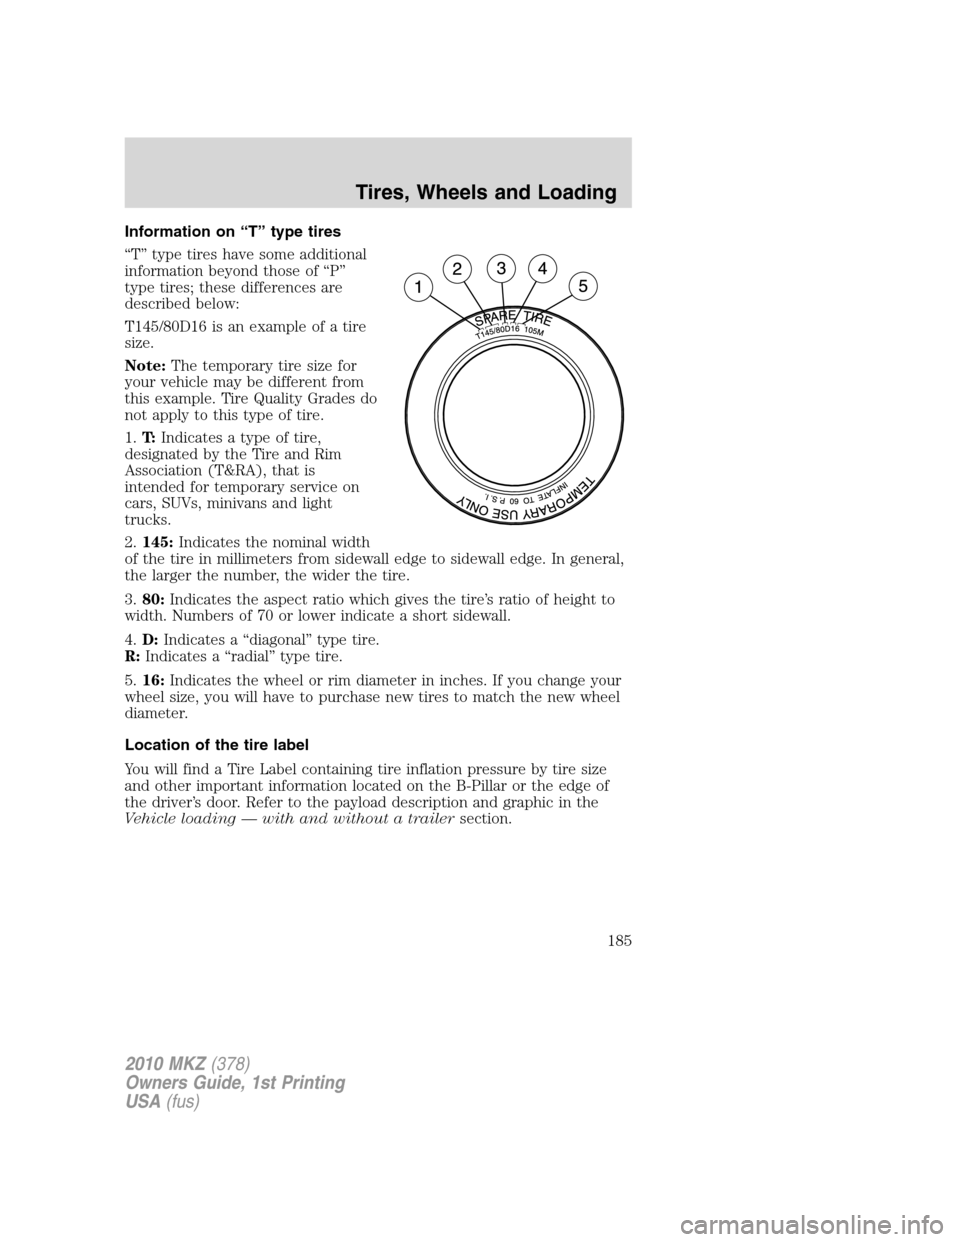 LINCOLN MKZ 2010  Owners Manual Information on “T” type tires
“T” type tires have some additional
information beyond those of “P”
type tires; these differences are
described below:
T145/80D16 is an example of a tire
size